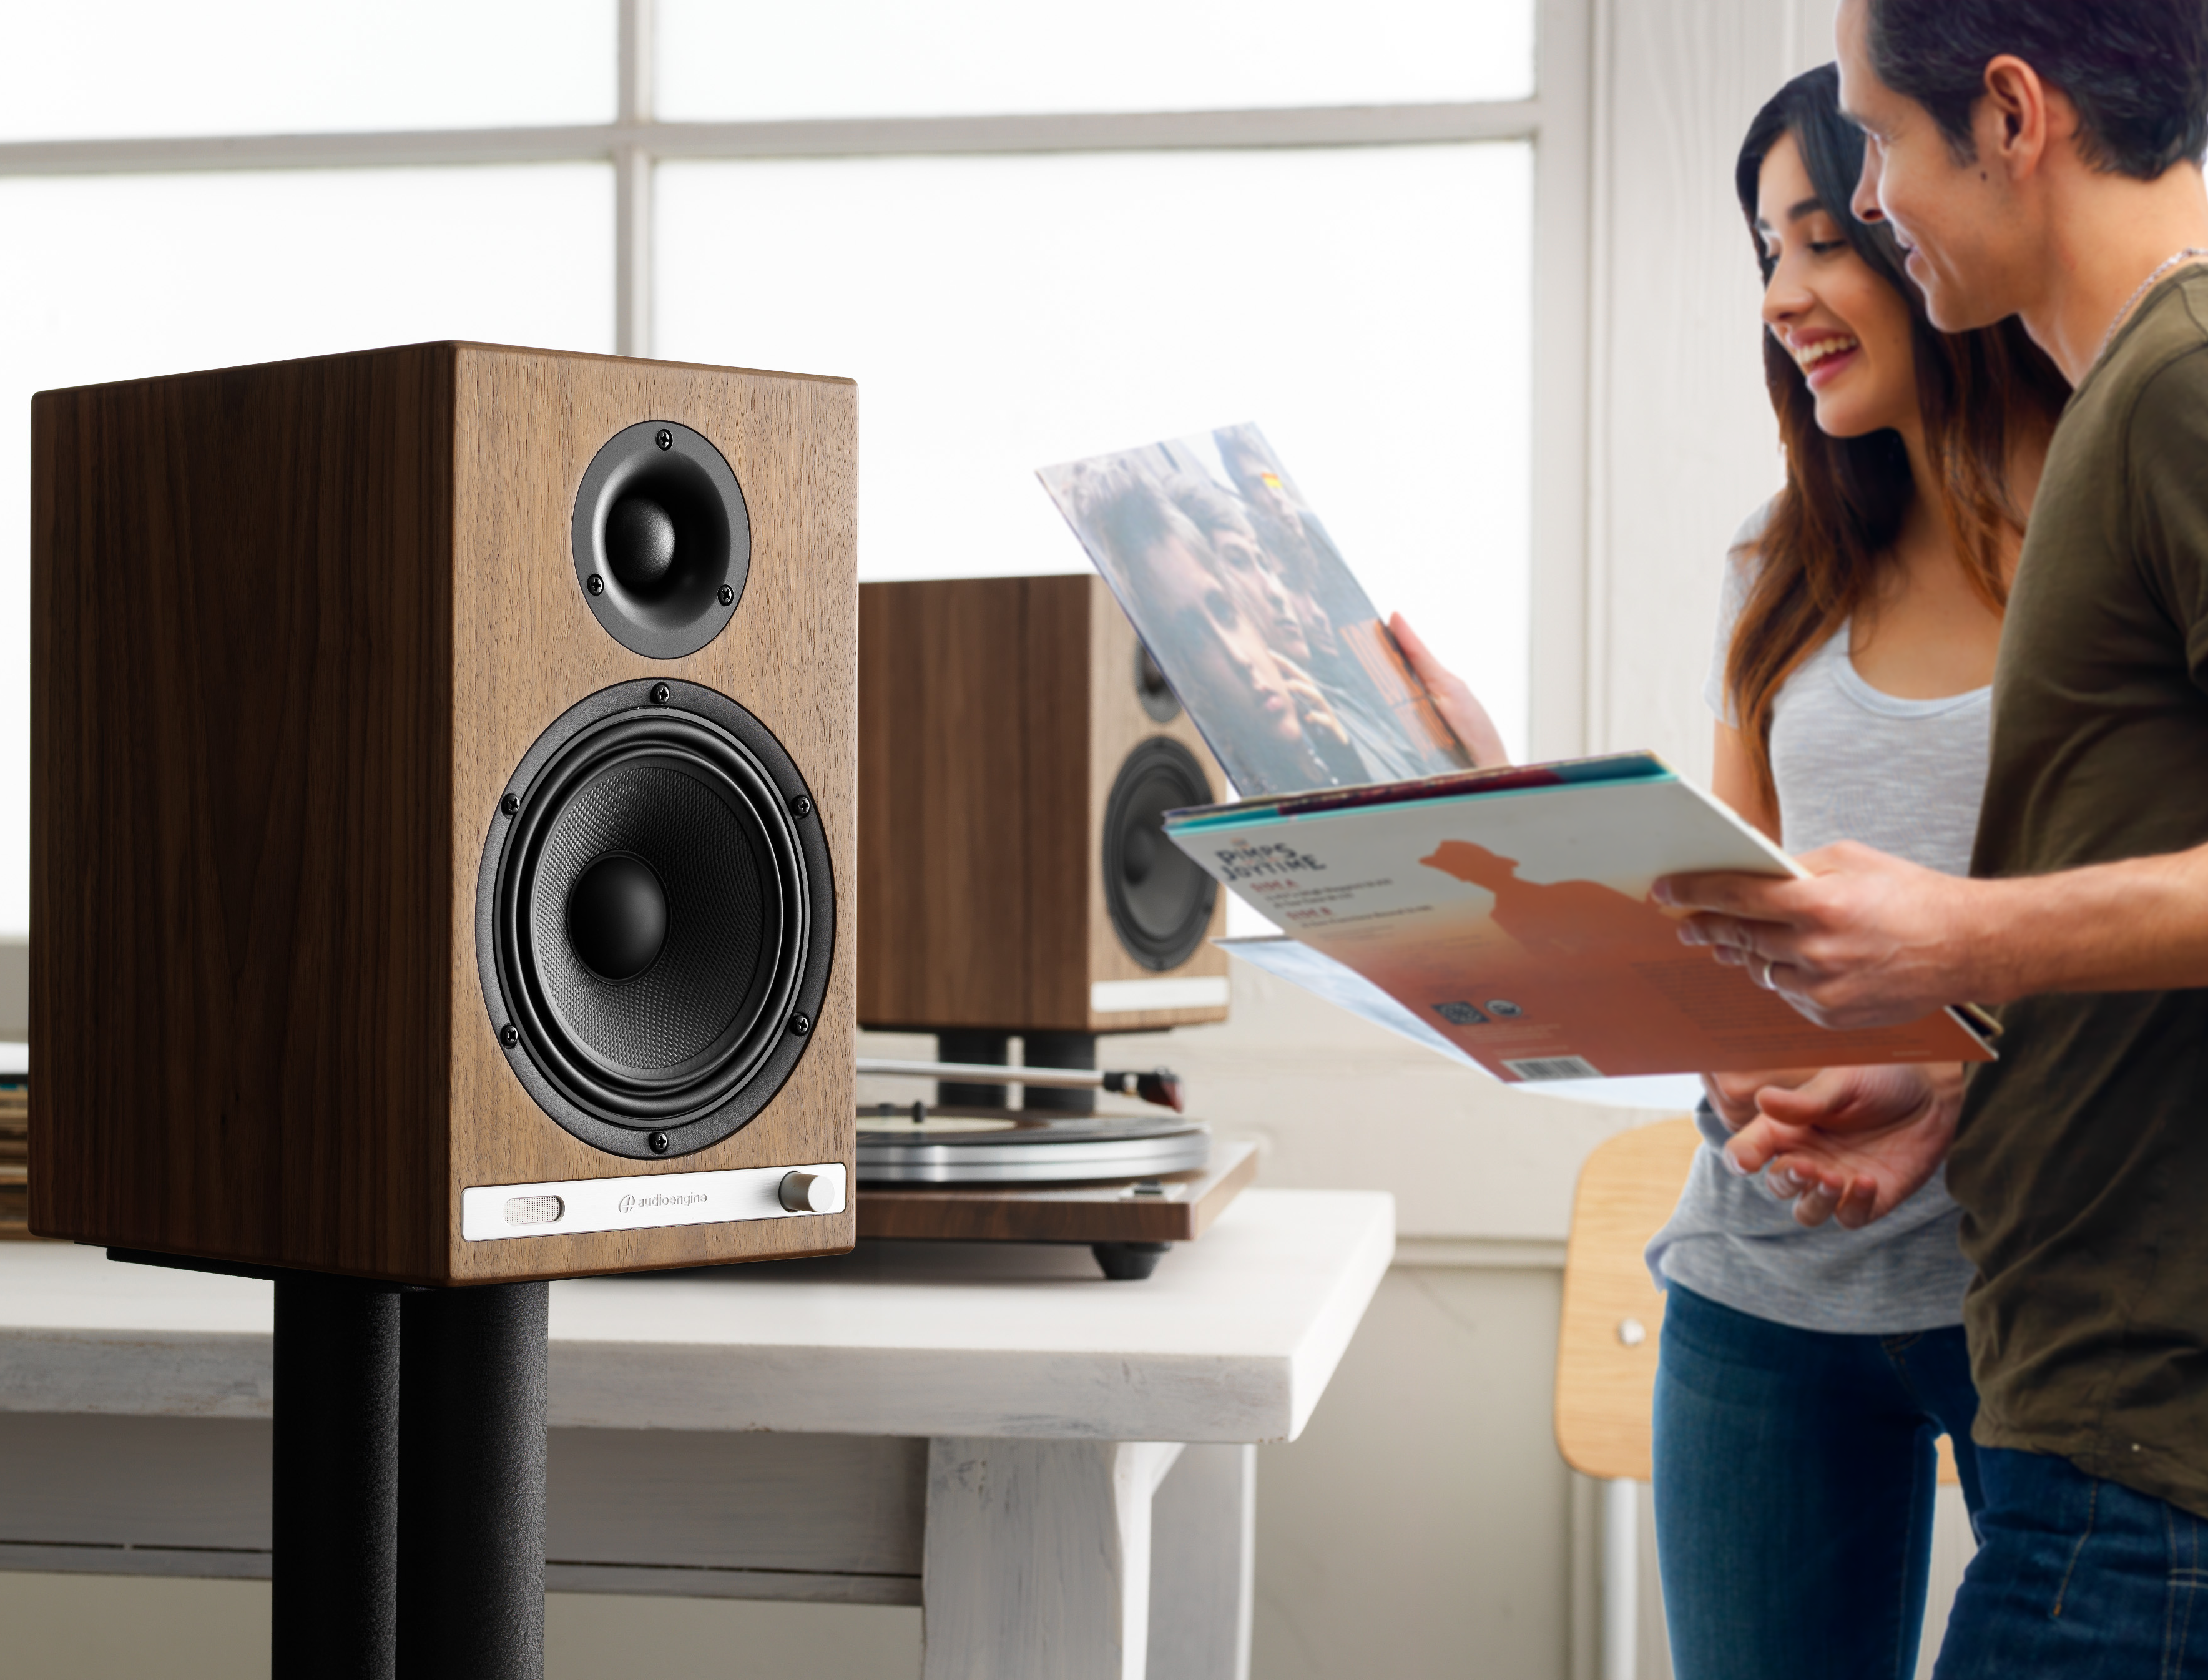 Top 3 Considerations When Buying Wireless Speakers